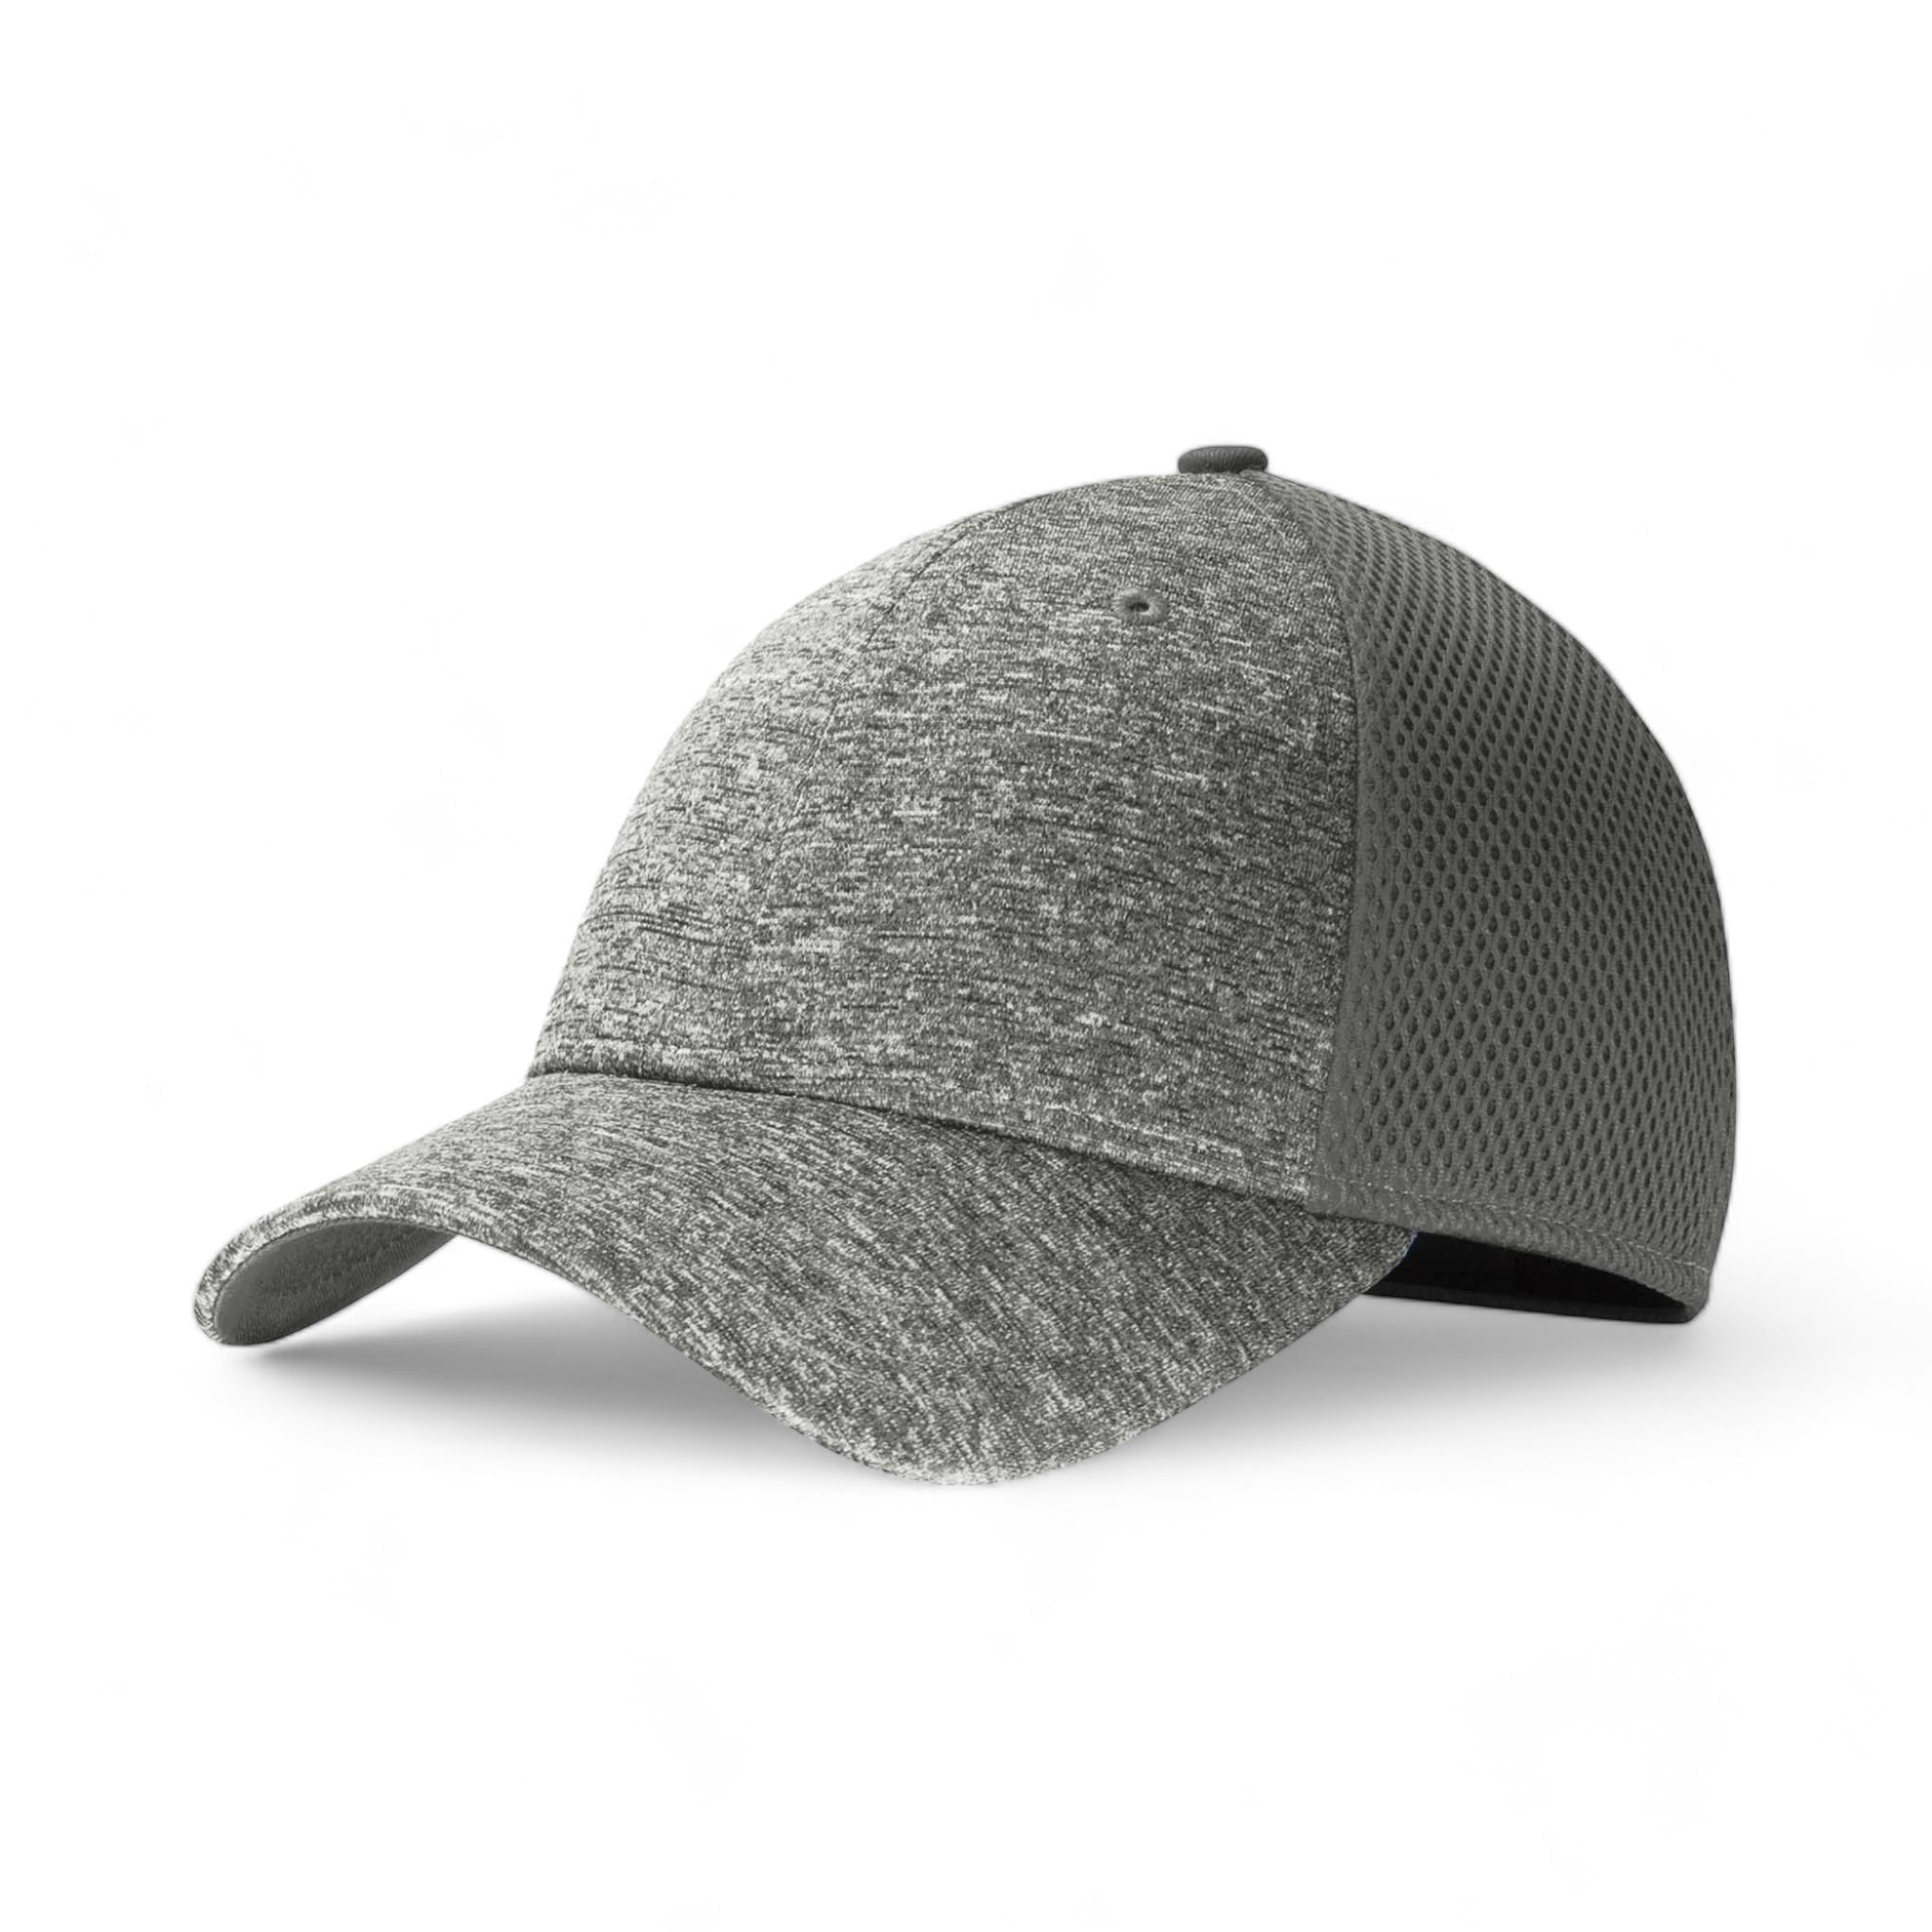 Side view of New Era NE702 custom hat in graphite and shadow heather